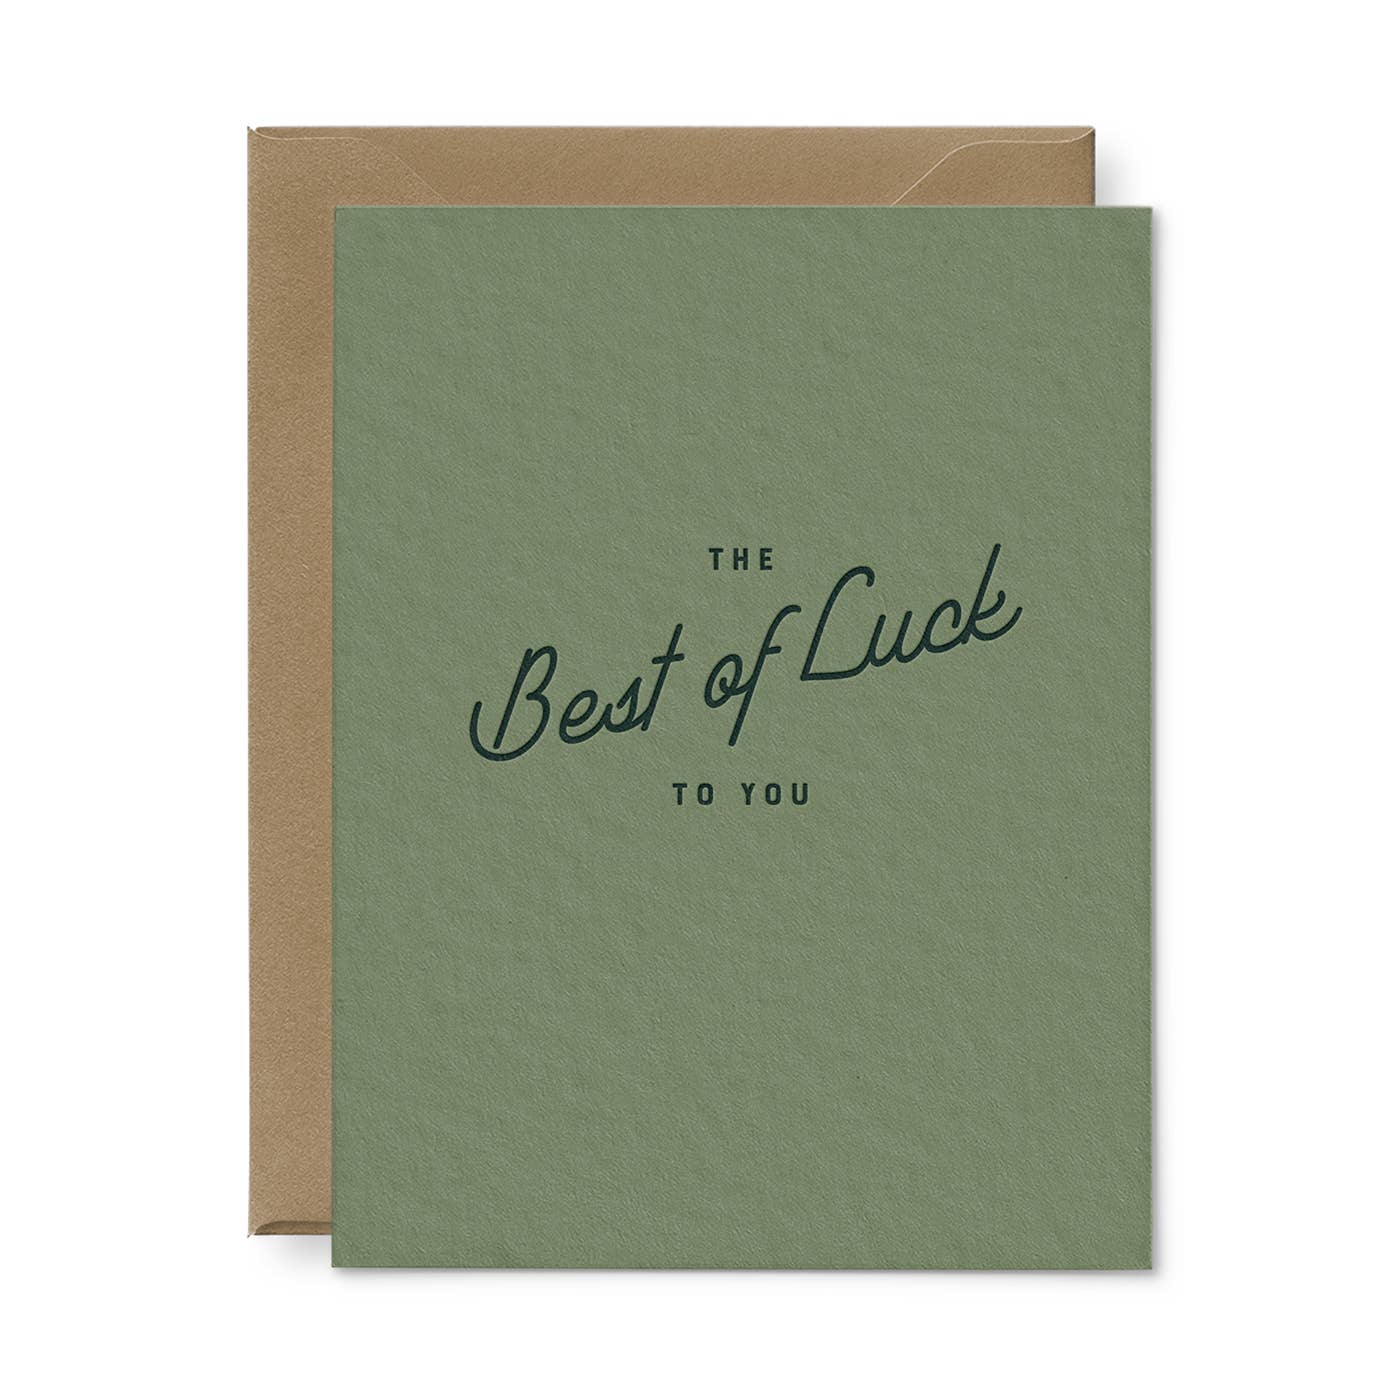 Best Of Luck Greeting Card: Single